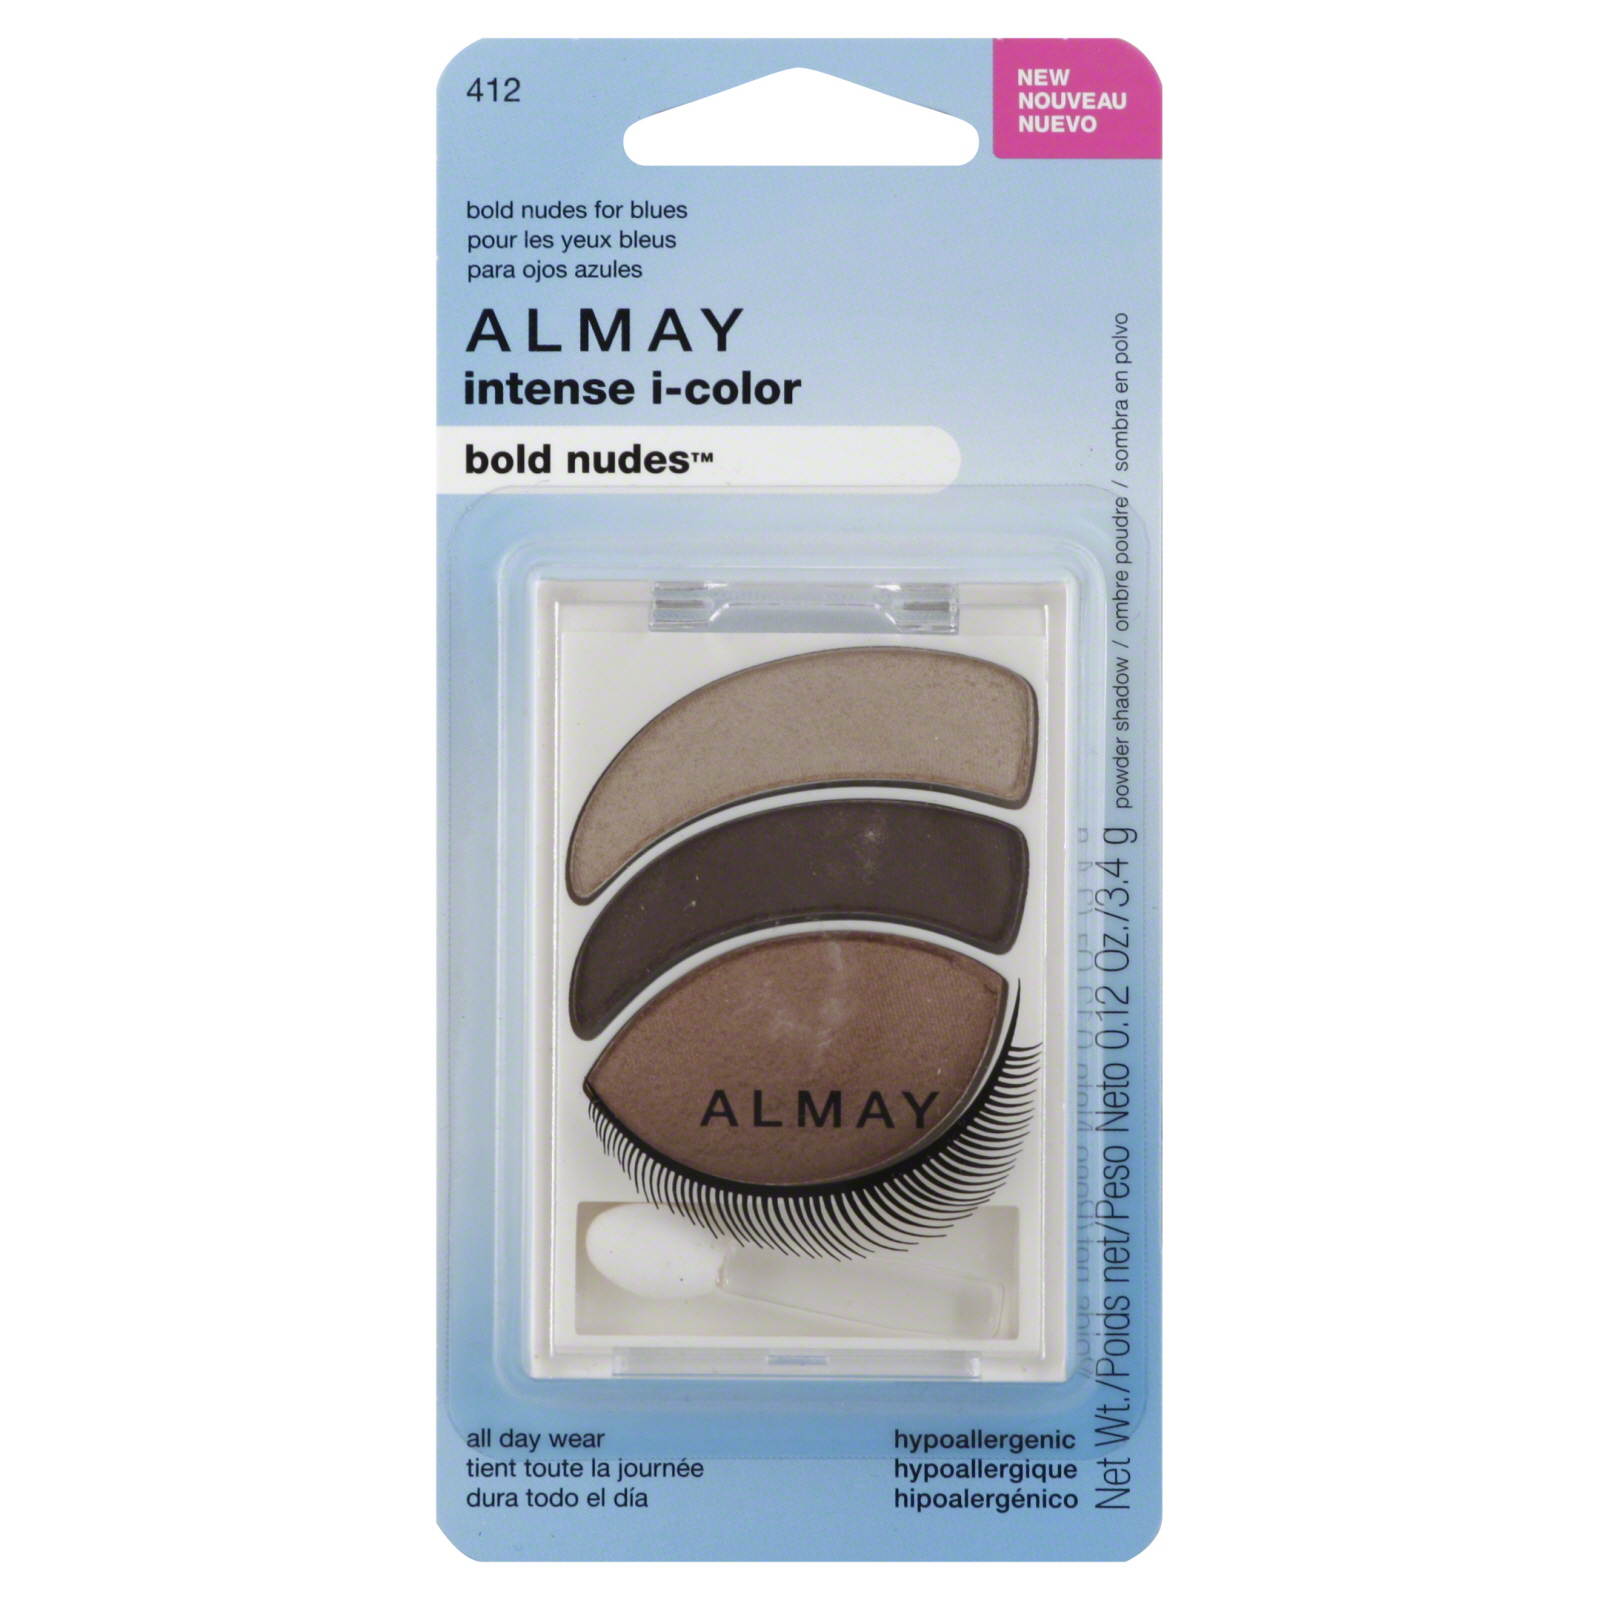 Almay Intense I-color Bold Nudes For Blues Eyes 0.12 oz